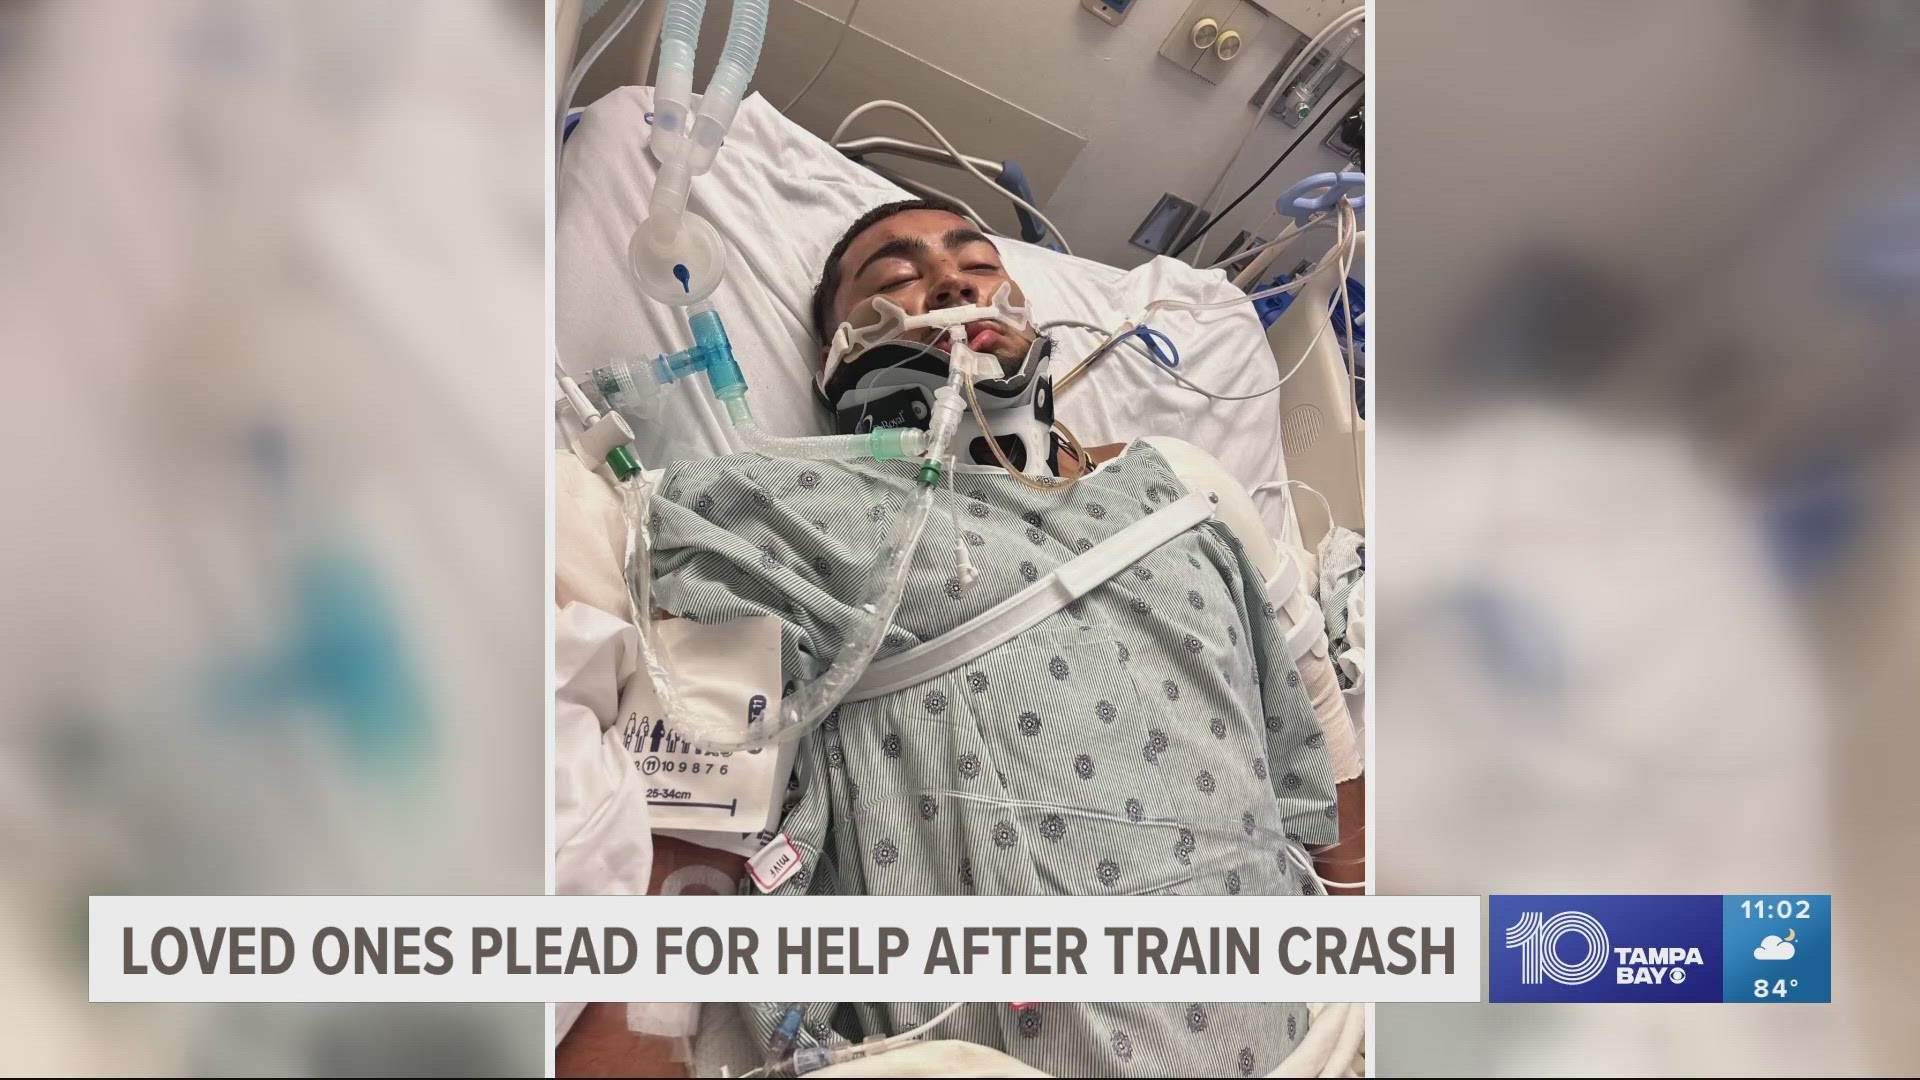 "The conductor of the train did everything he could to try to slow this train down," the Hillsborough County sheriff said.